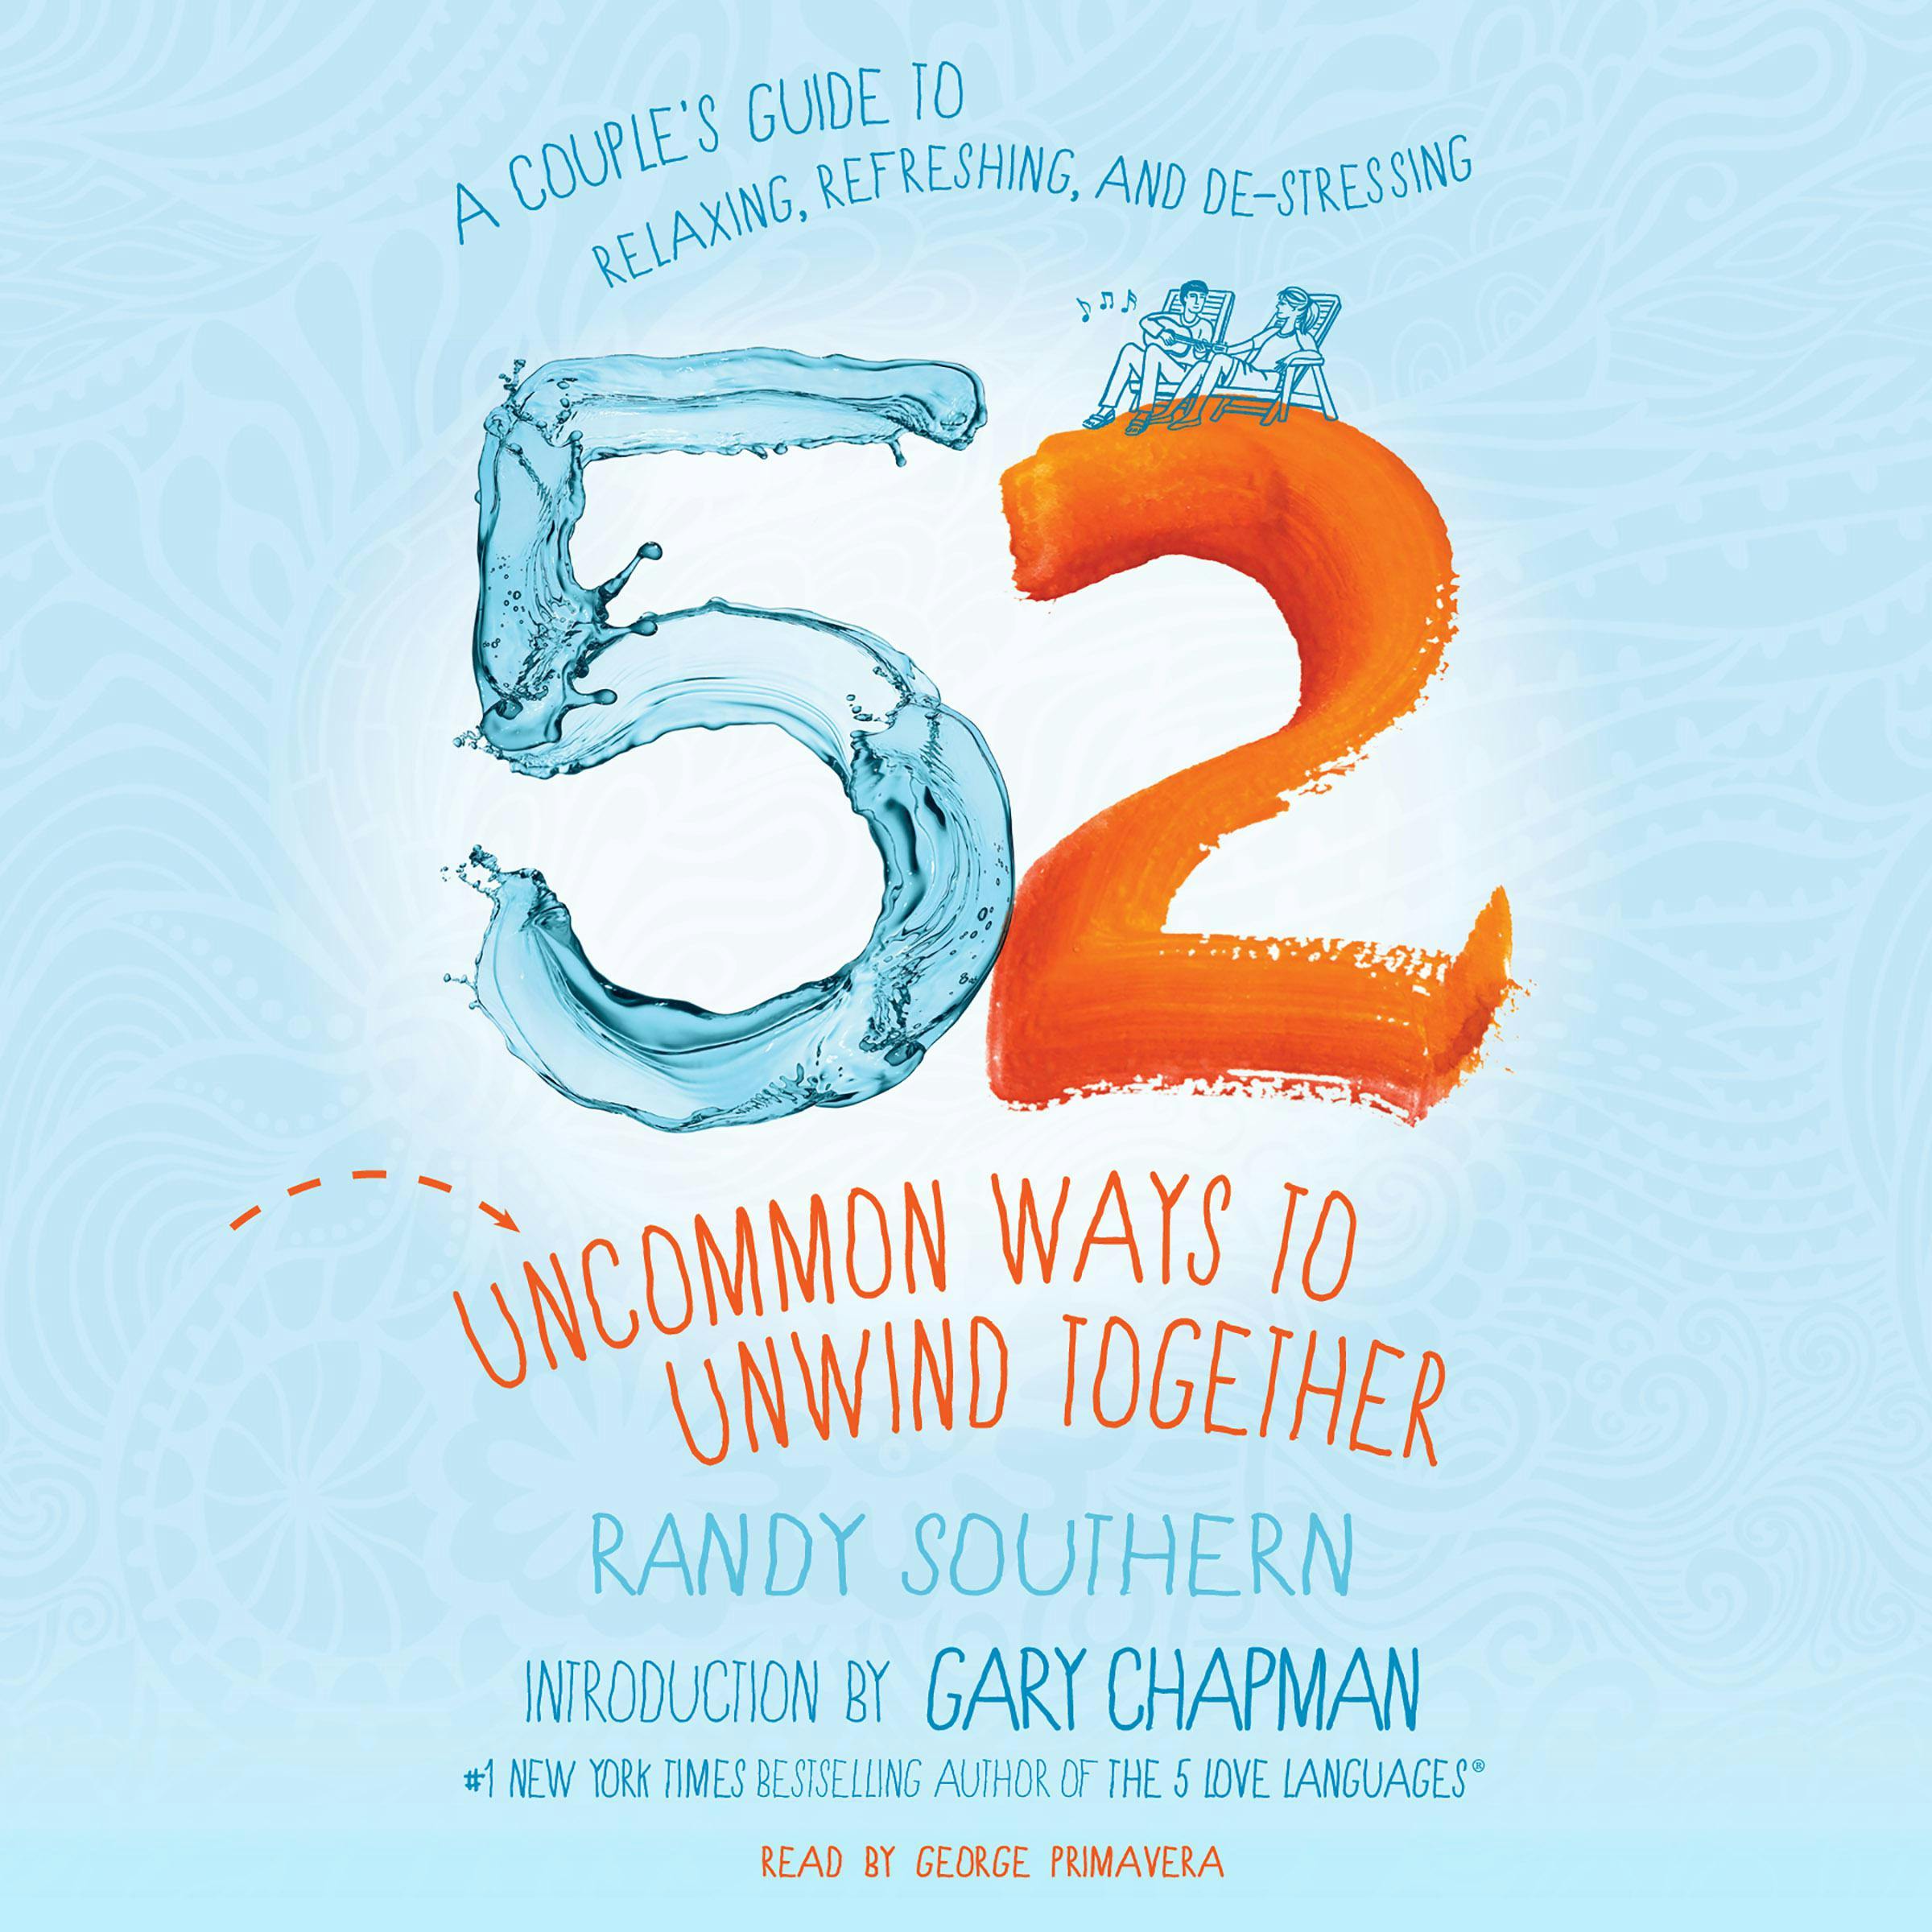 52 Uncommon Ways to Unwind Together: A Couple's Guide to Relaxing, Refreshing, and De-Stressing - Gary Chapman, Randy Southern